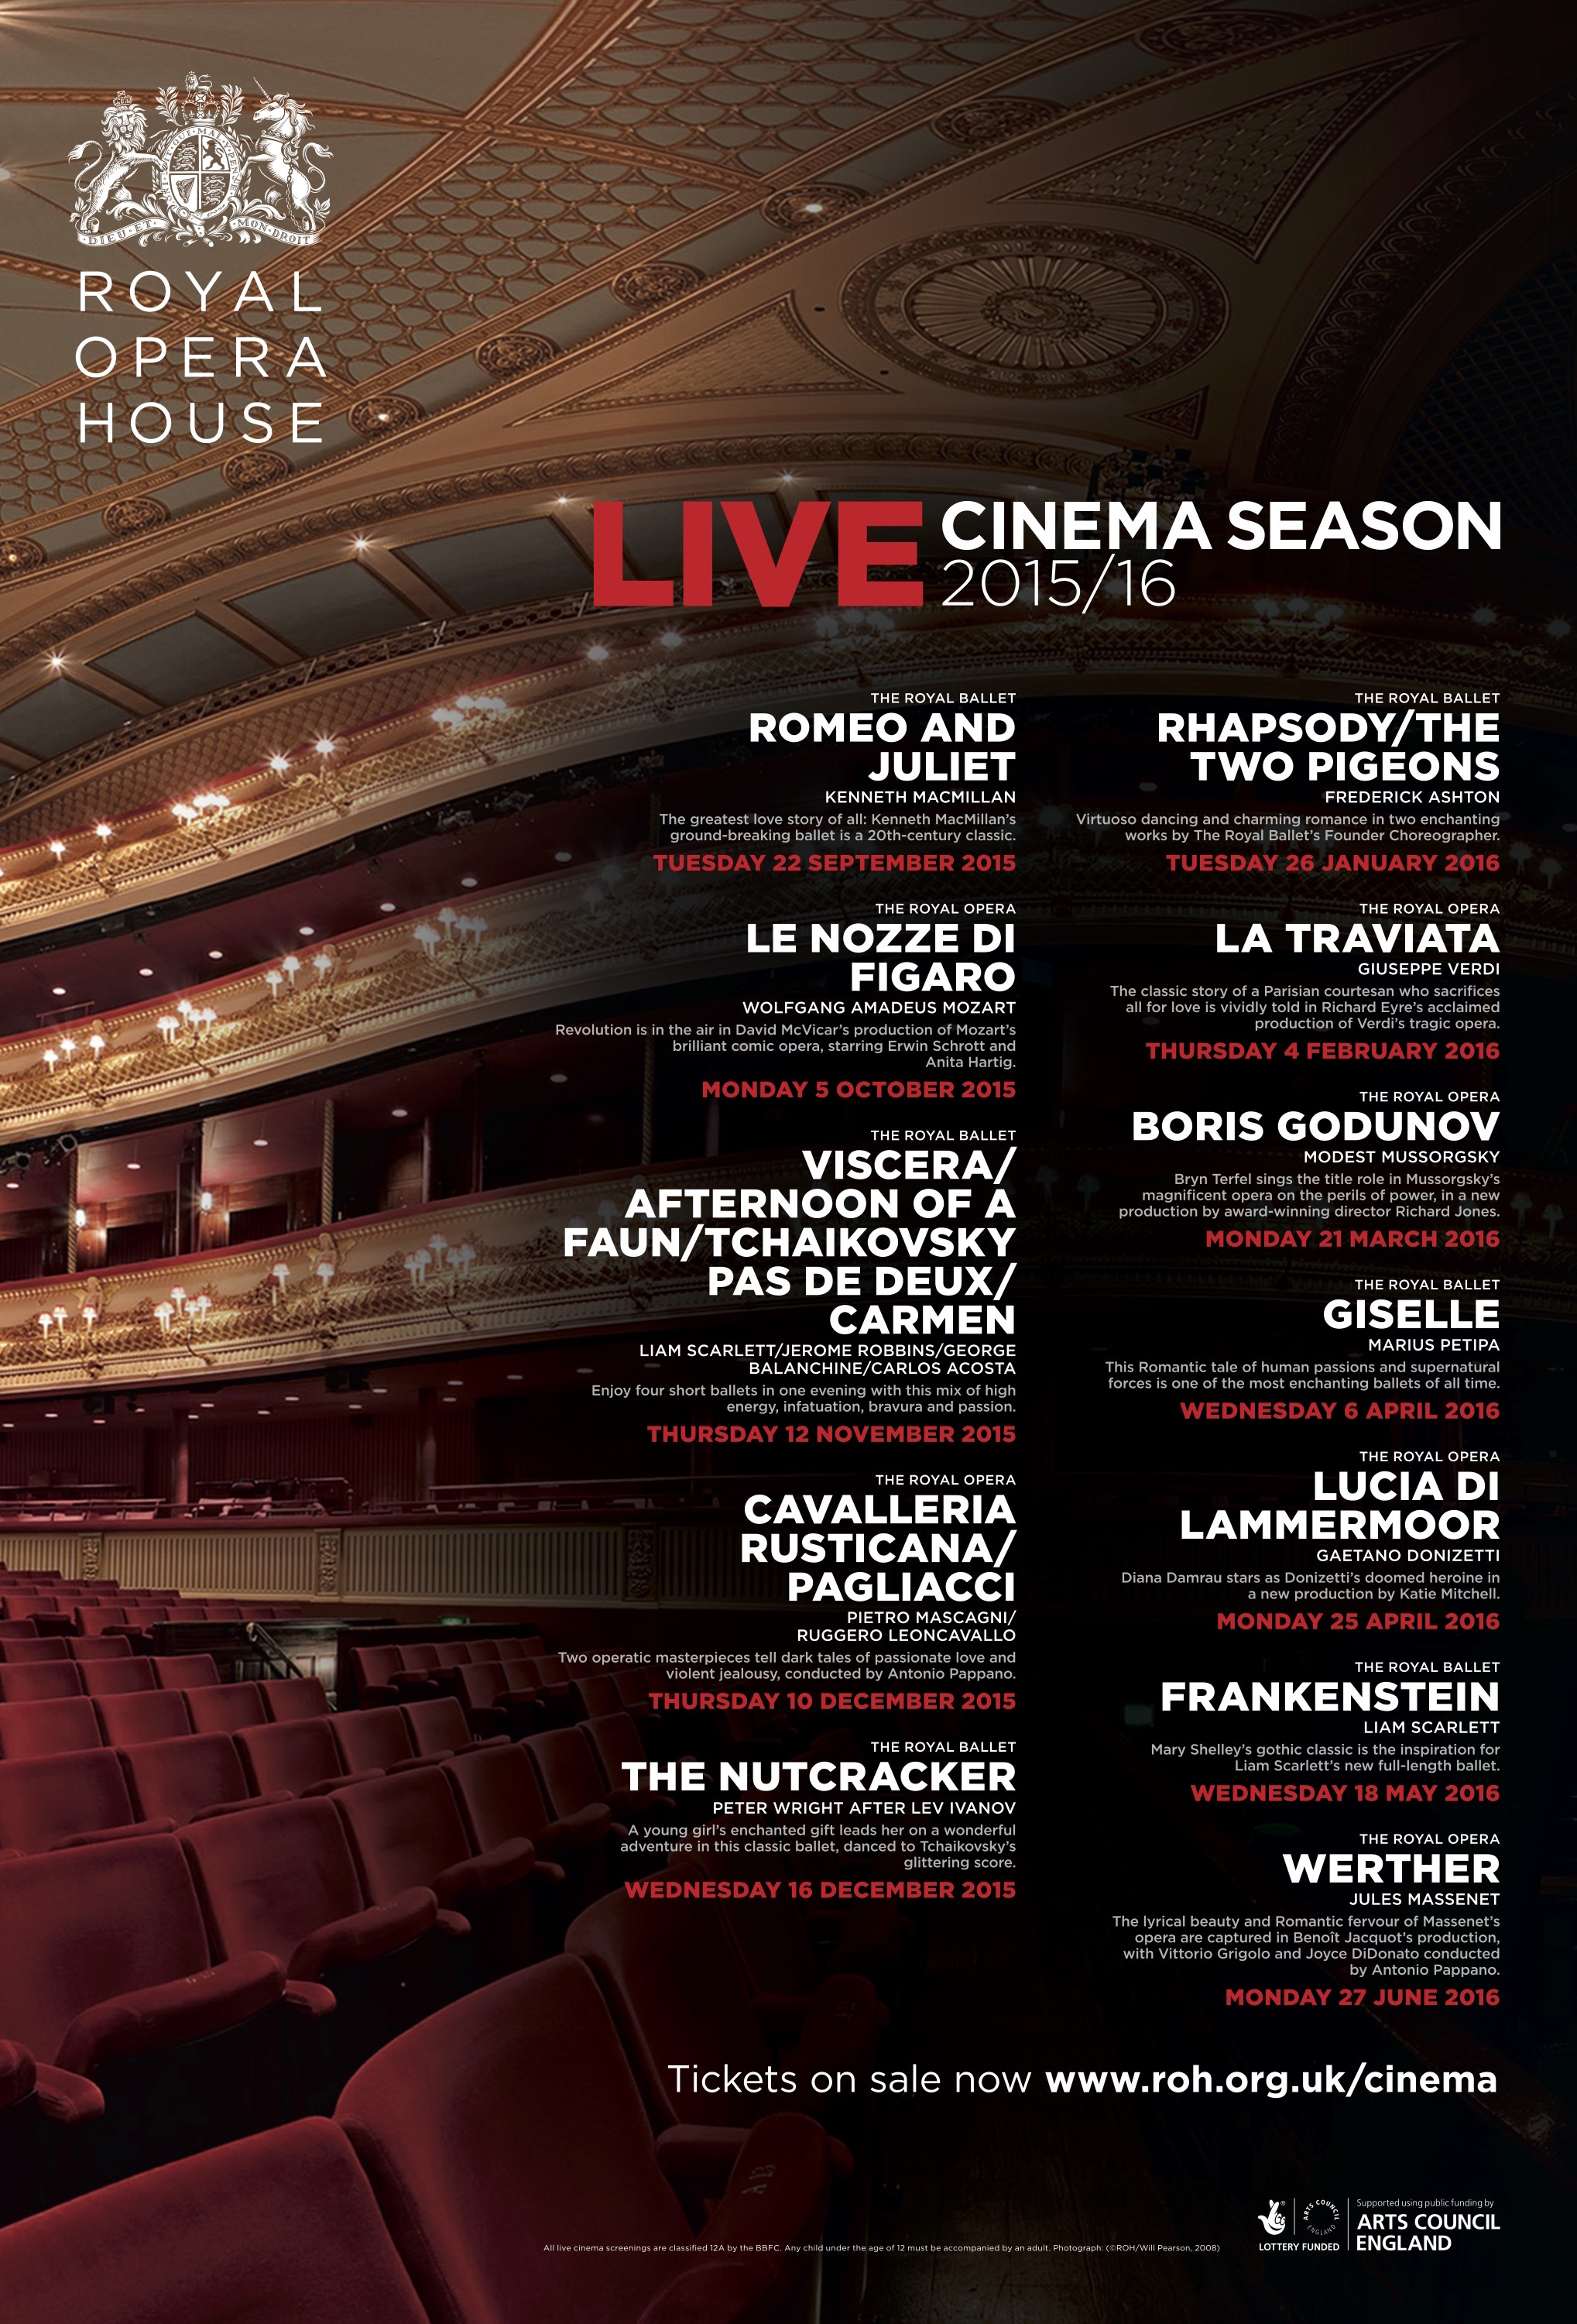 ANNOUNCING THE MOST AMBITIOUS ROYAL OPERA HOUSE LIVE CINEMA SEASON 1 The Royal Opera House Live Cinema Season 2015/16 is the most ambitious to date. Six ballets and six operas, including five new productions, will be screened in over 1,000 cinemas across 45 countries allowing audiences in the US to experience more opera and ballet from the Royal Opera House than ever before. 